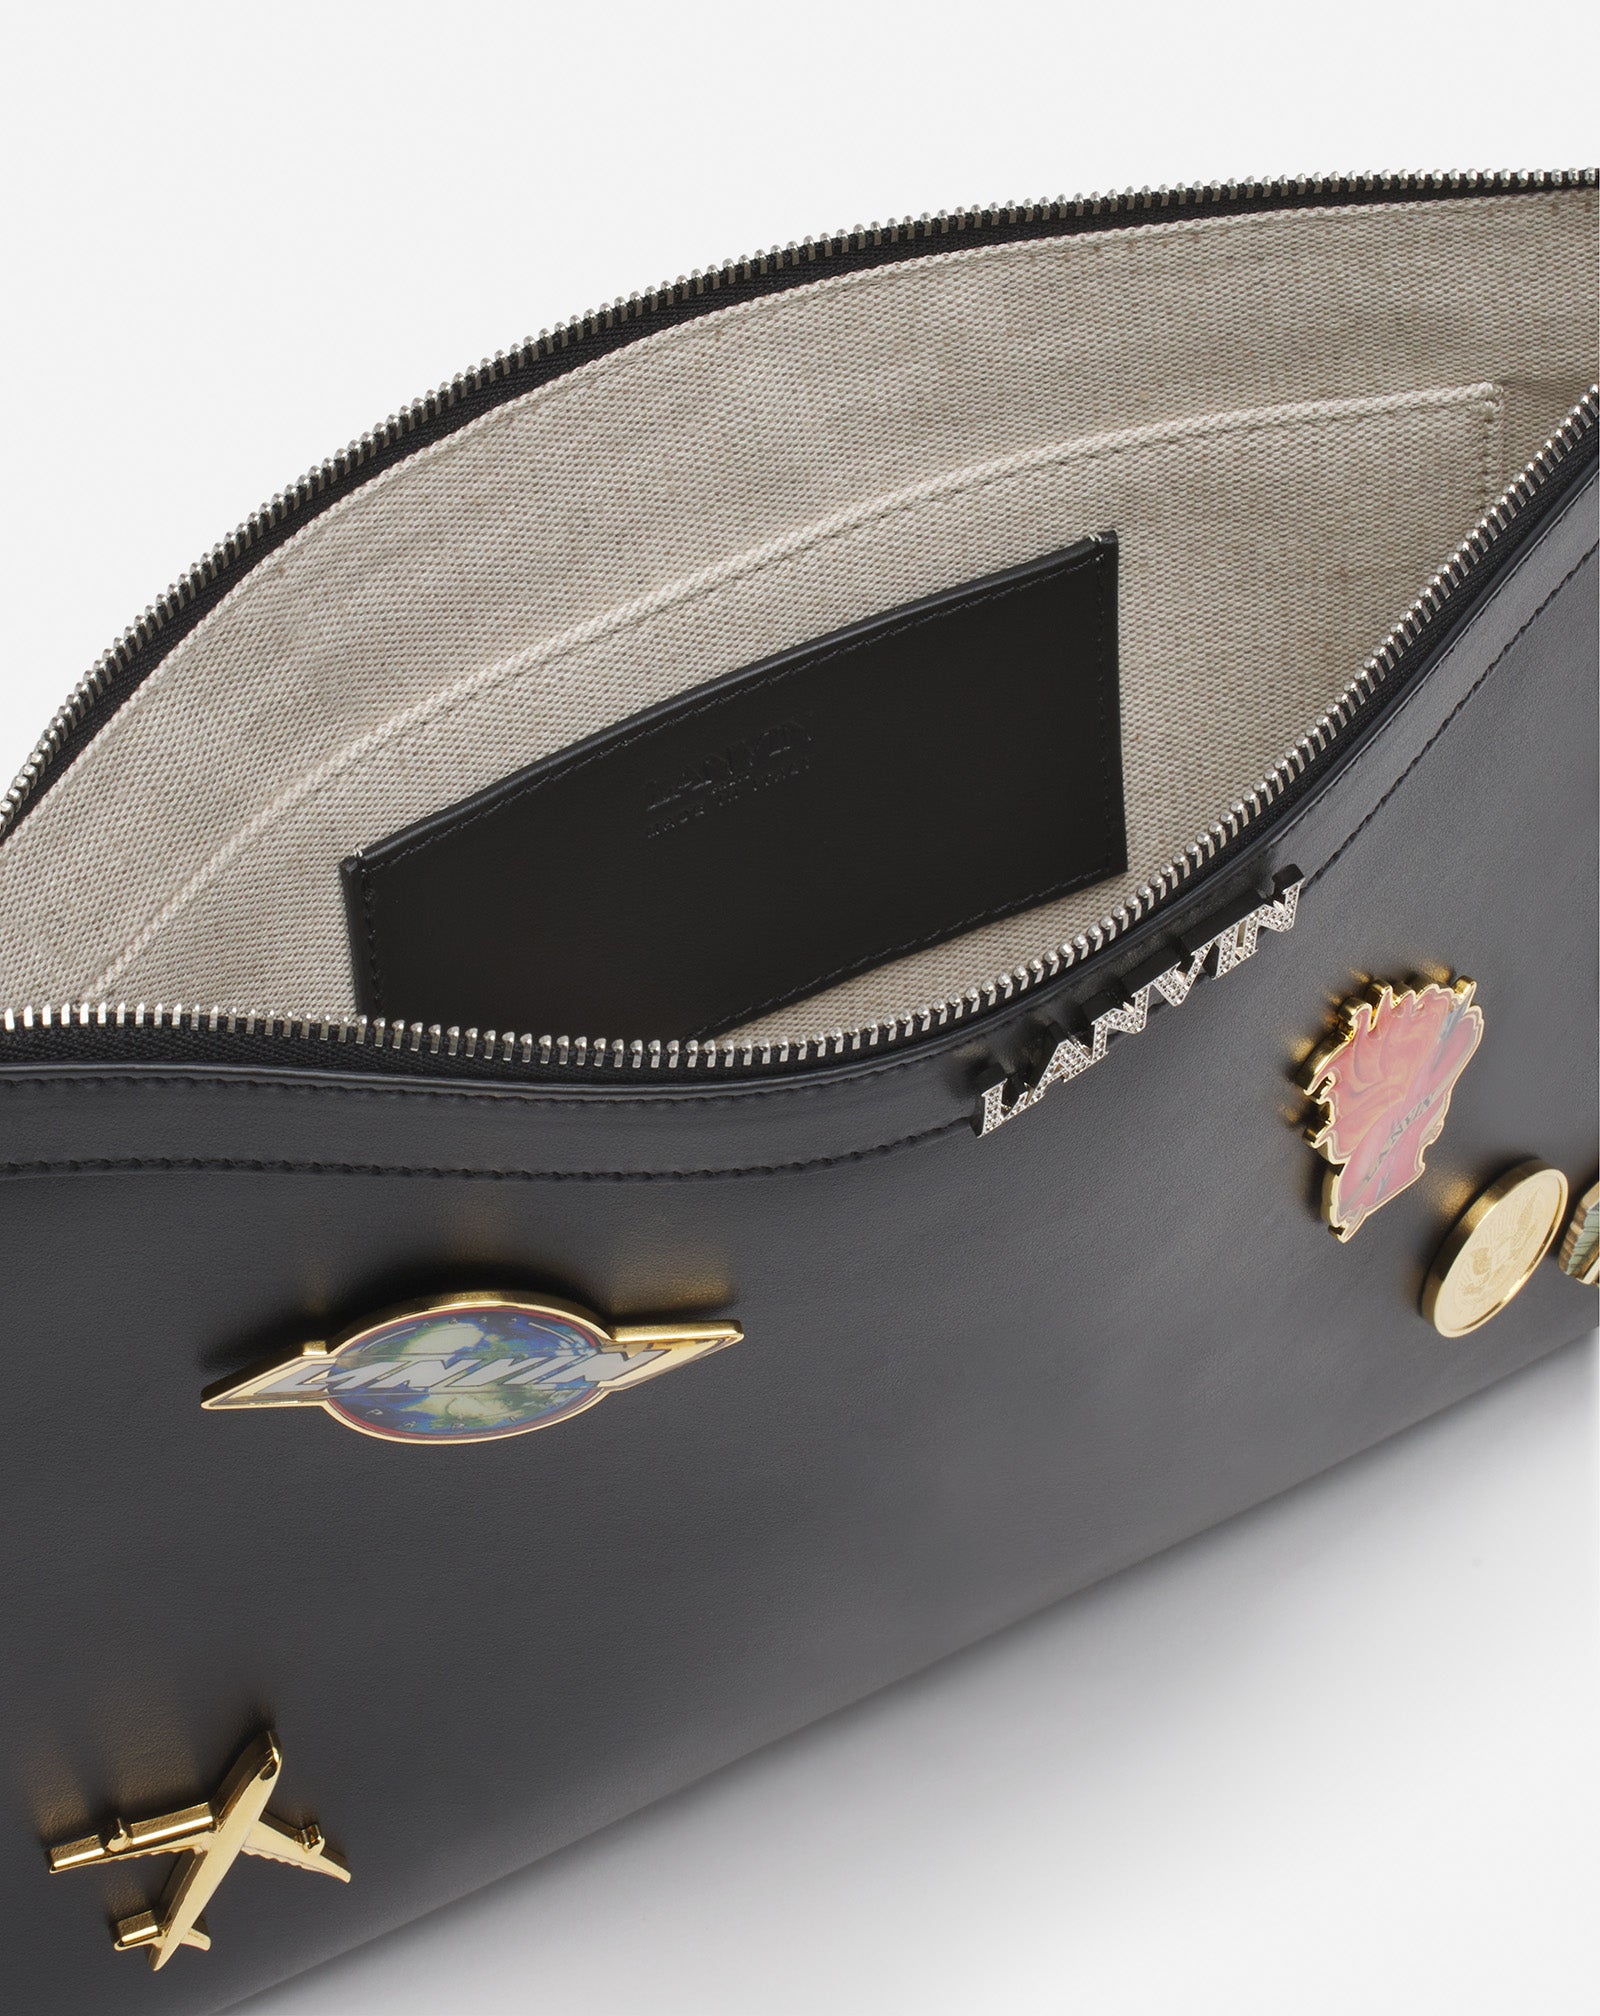 Lanvin x future leather clutch with pins